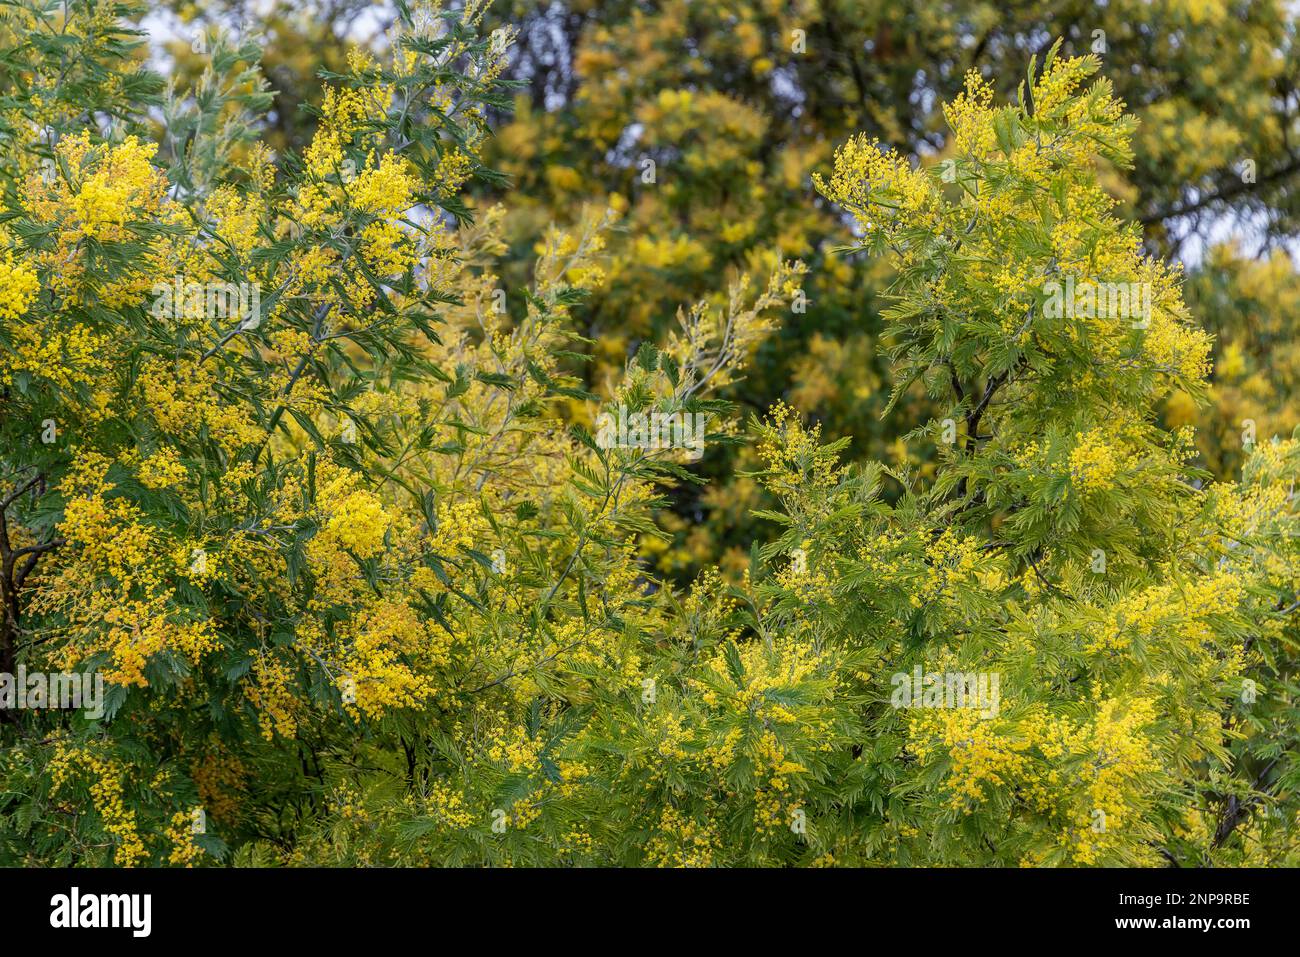 Close up view of the branches of a blooming mimosa tree Stock Photo